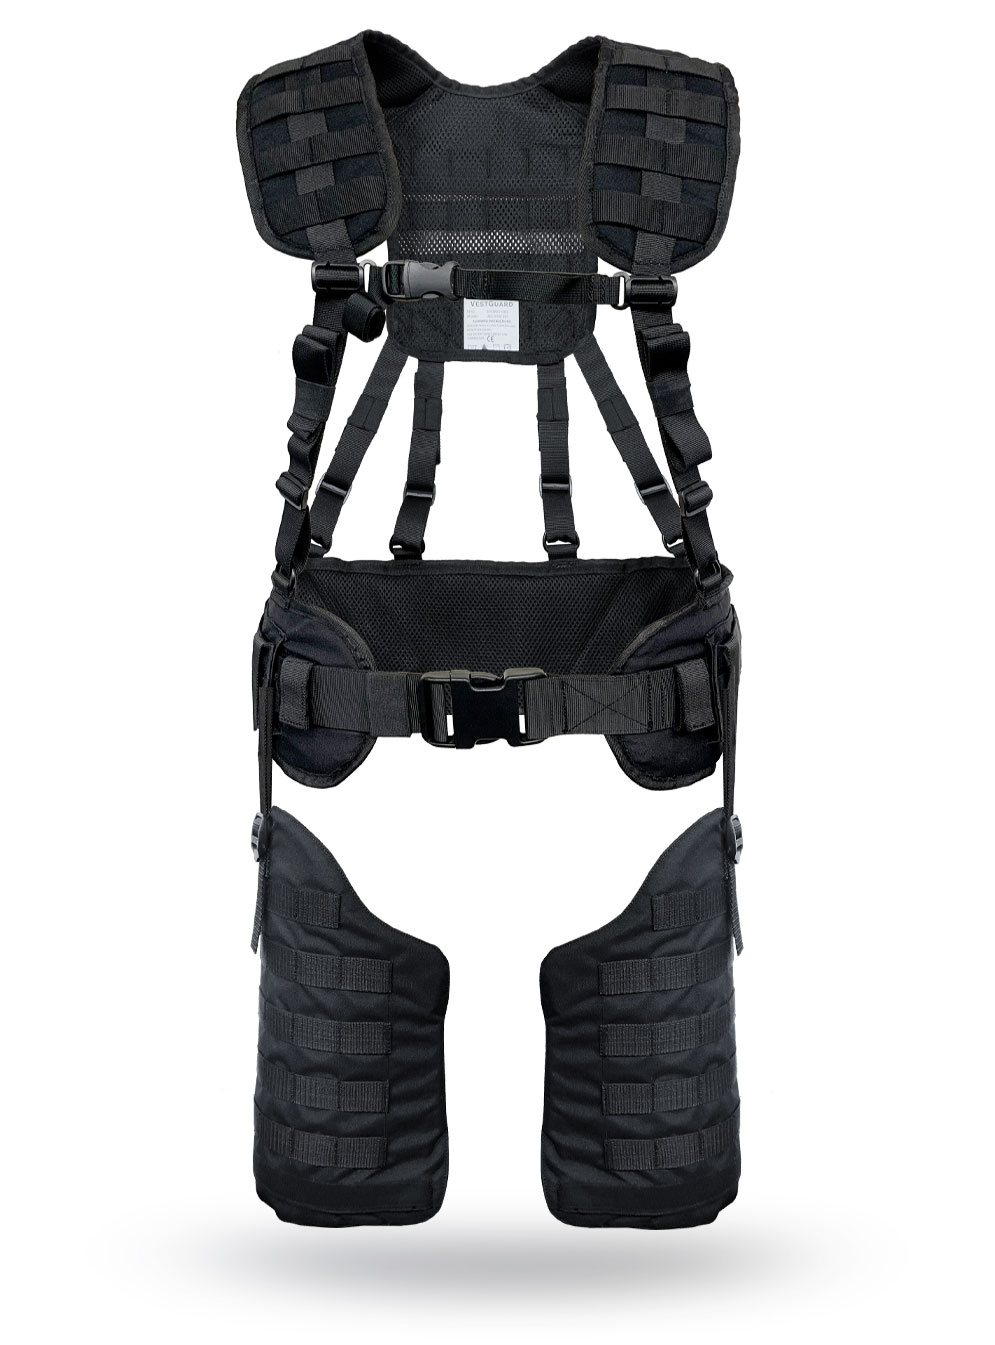 Body Armour Accessories